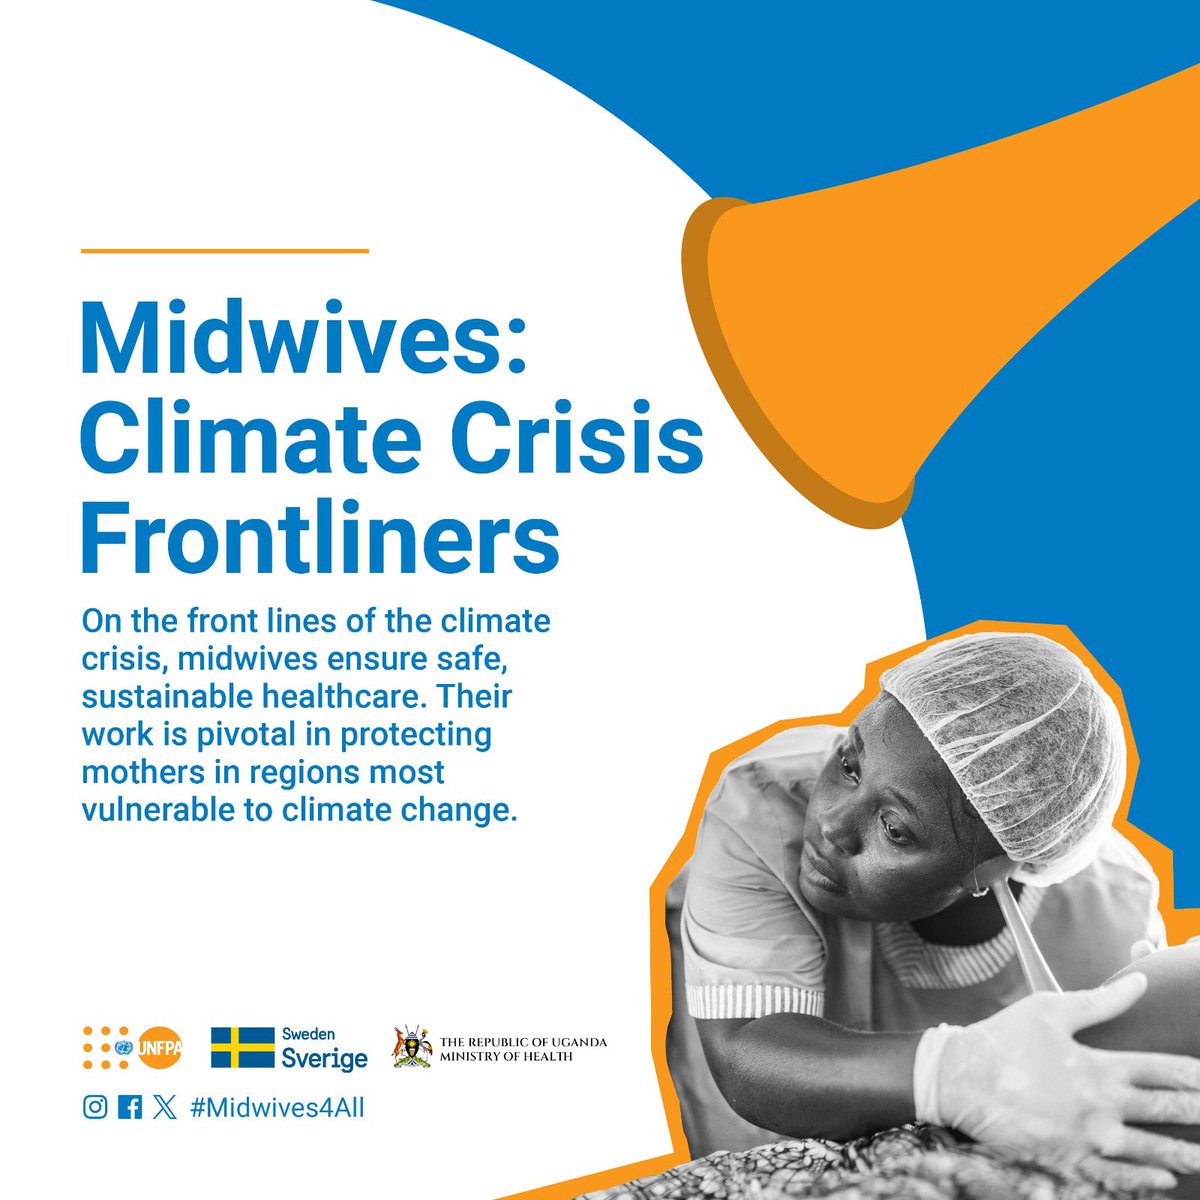 On the front lines of the climate crisis, midwives ensure safe, sustainable healthcare. Their work is pivotal in protecting mothers in regions most vulnerable to climate change.

#Midwives4All